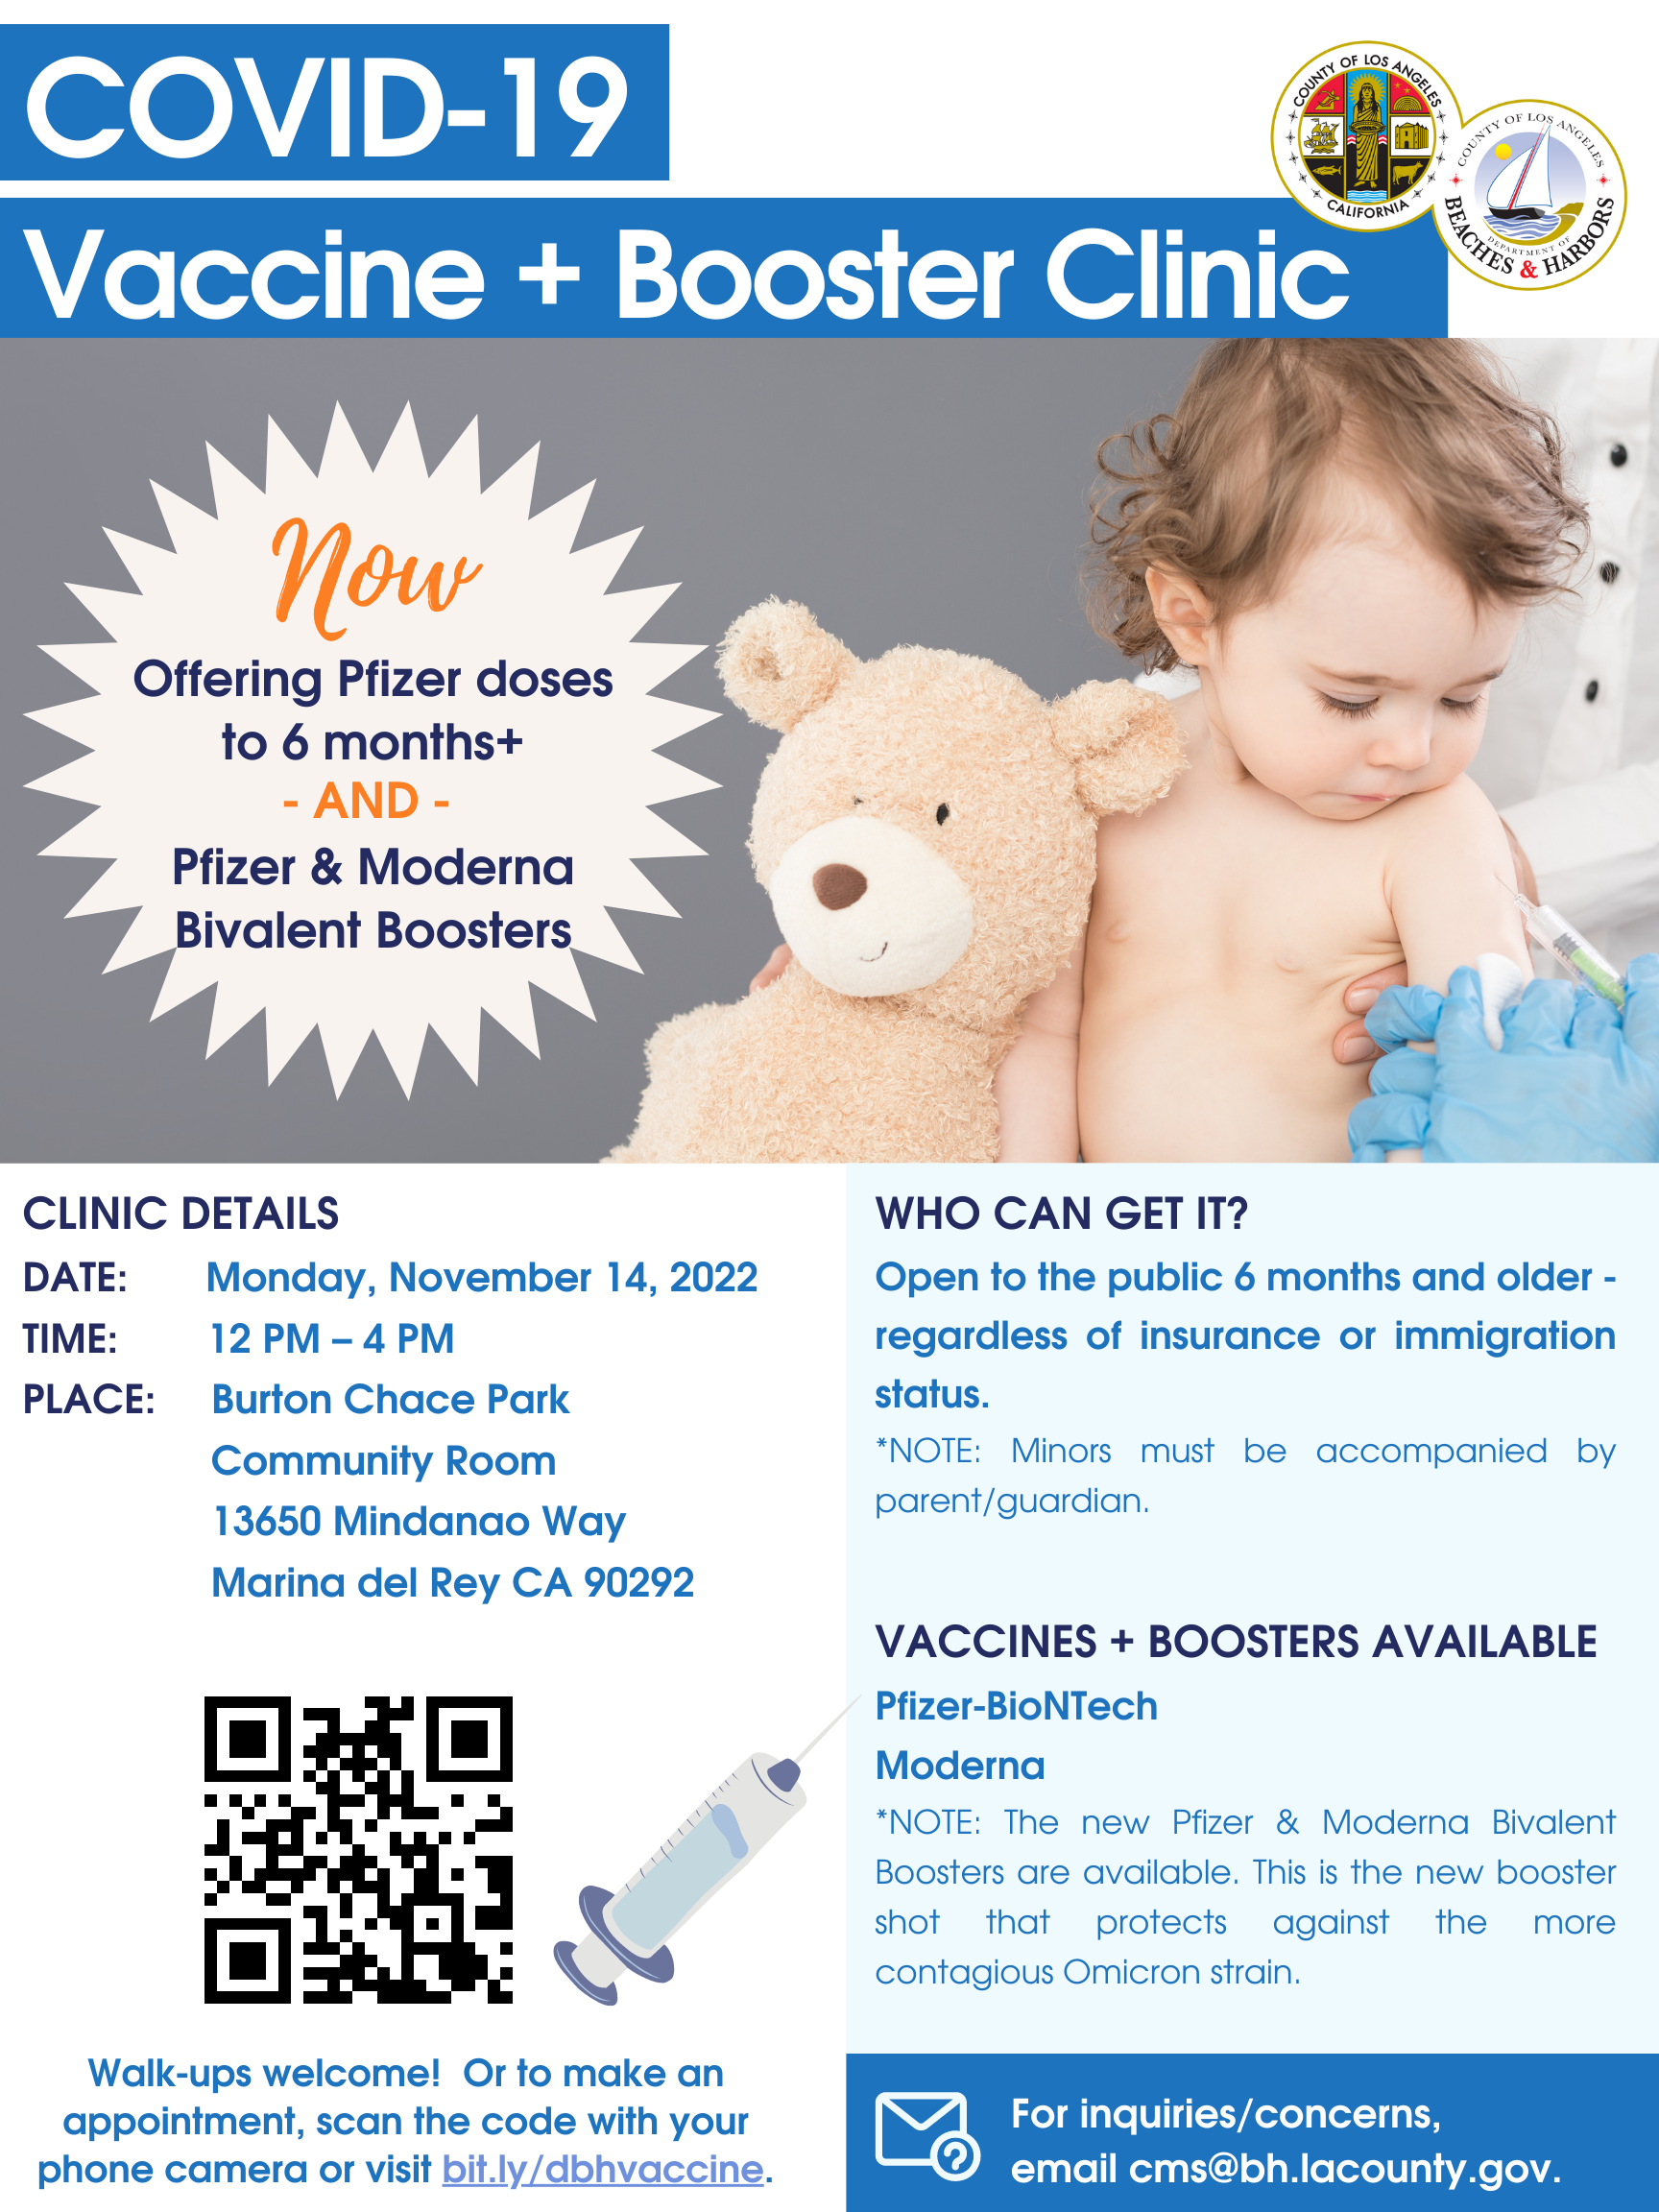 COVID-19 Vaccine and Booster Clinic (November 14)